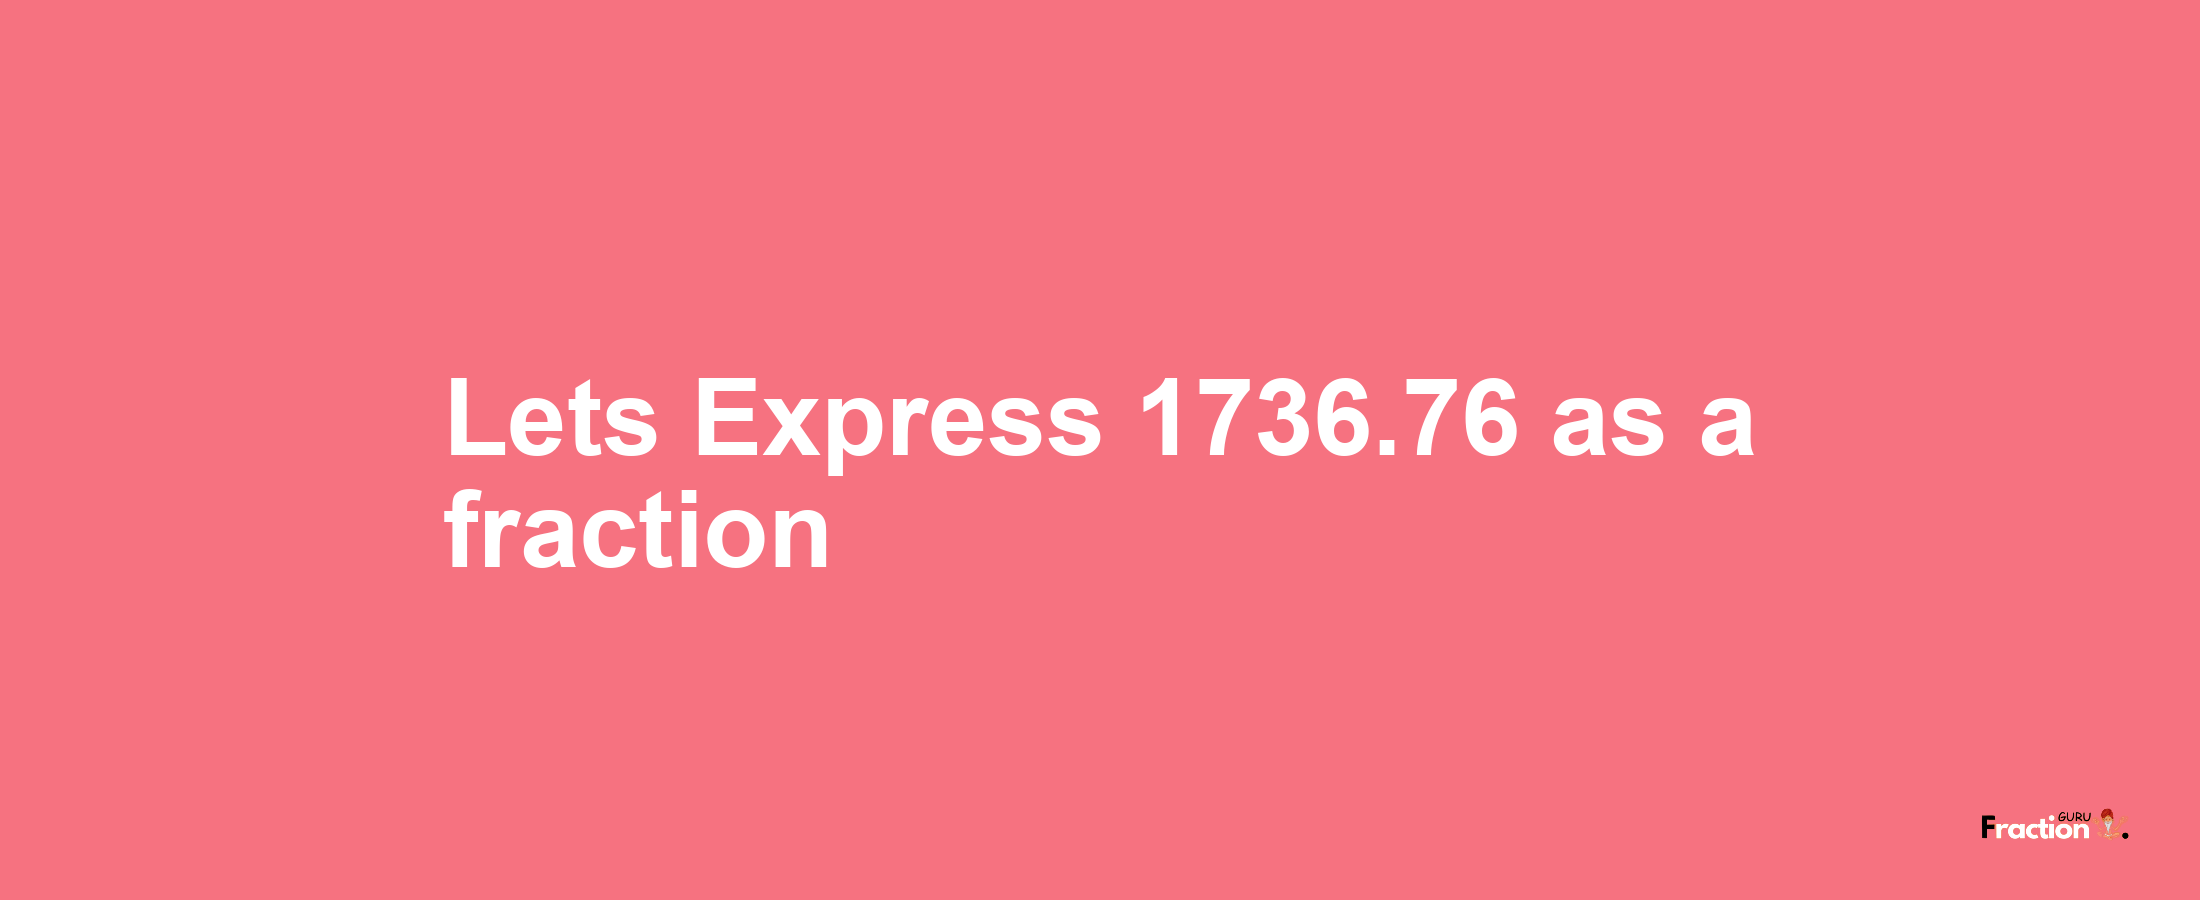 Lets Express 1736.76 as afraction